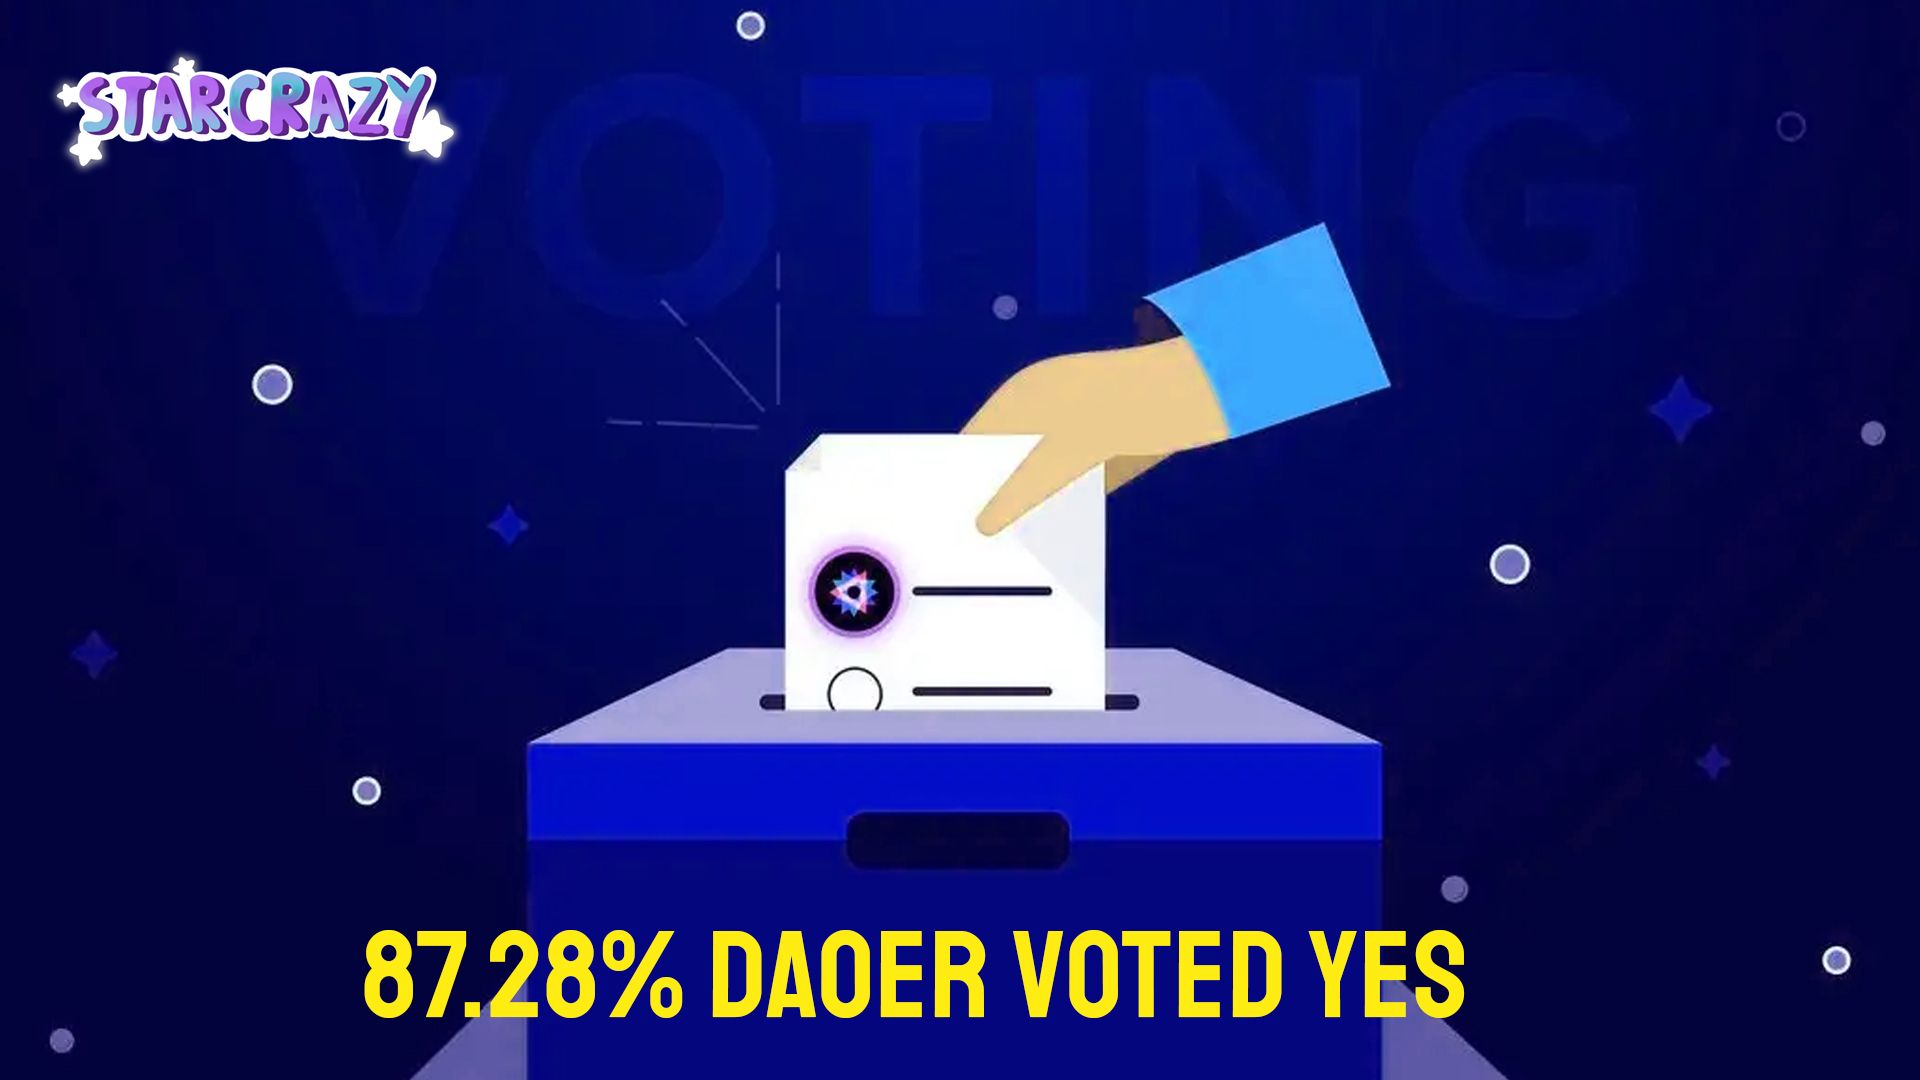 87.28% DAOer Voted Yes for the First DAO Proposal